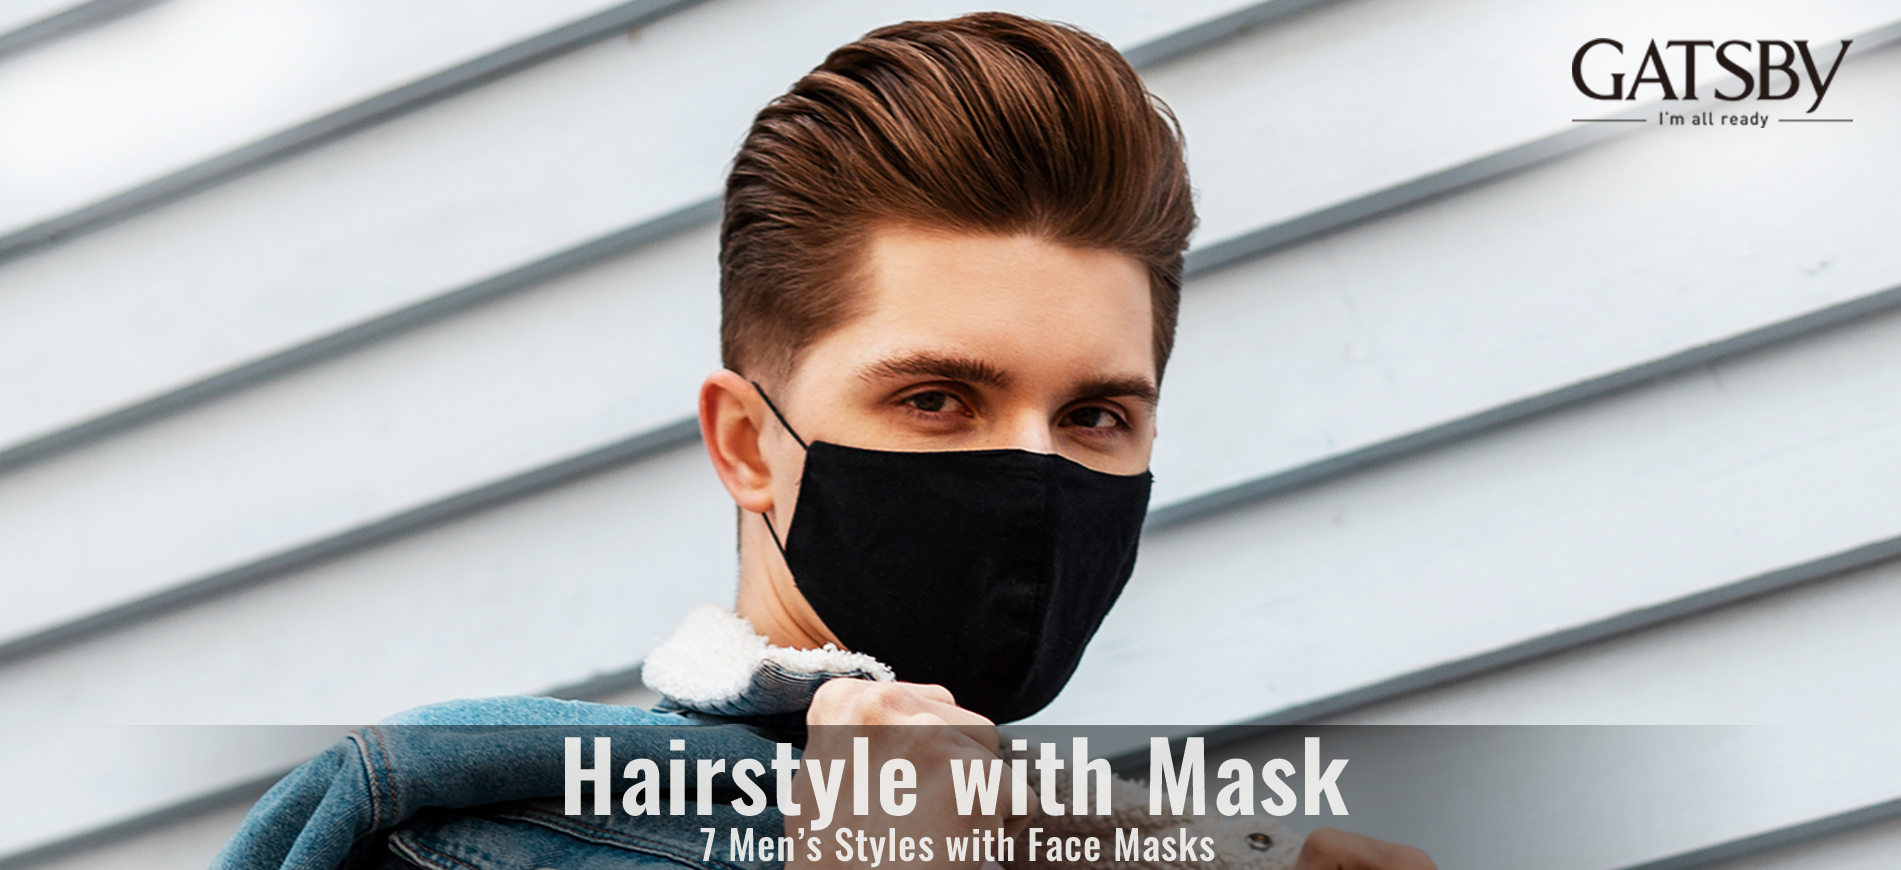 Mask Hairstyles for Men: 7 Perfect Styles for Face Masks | GATSBY is your  only choice of men's hair wax.